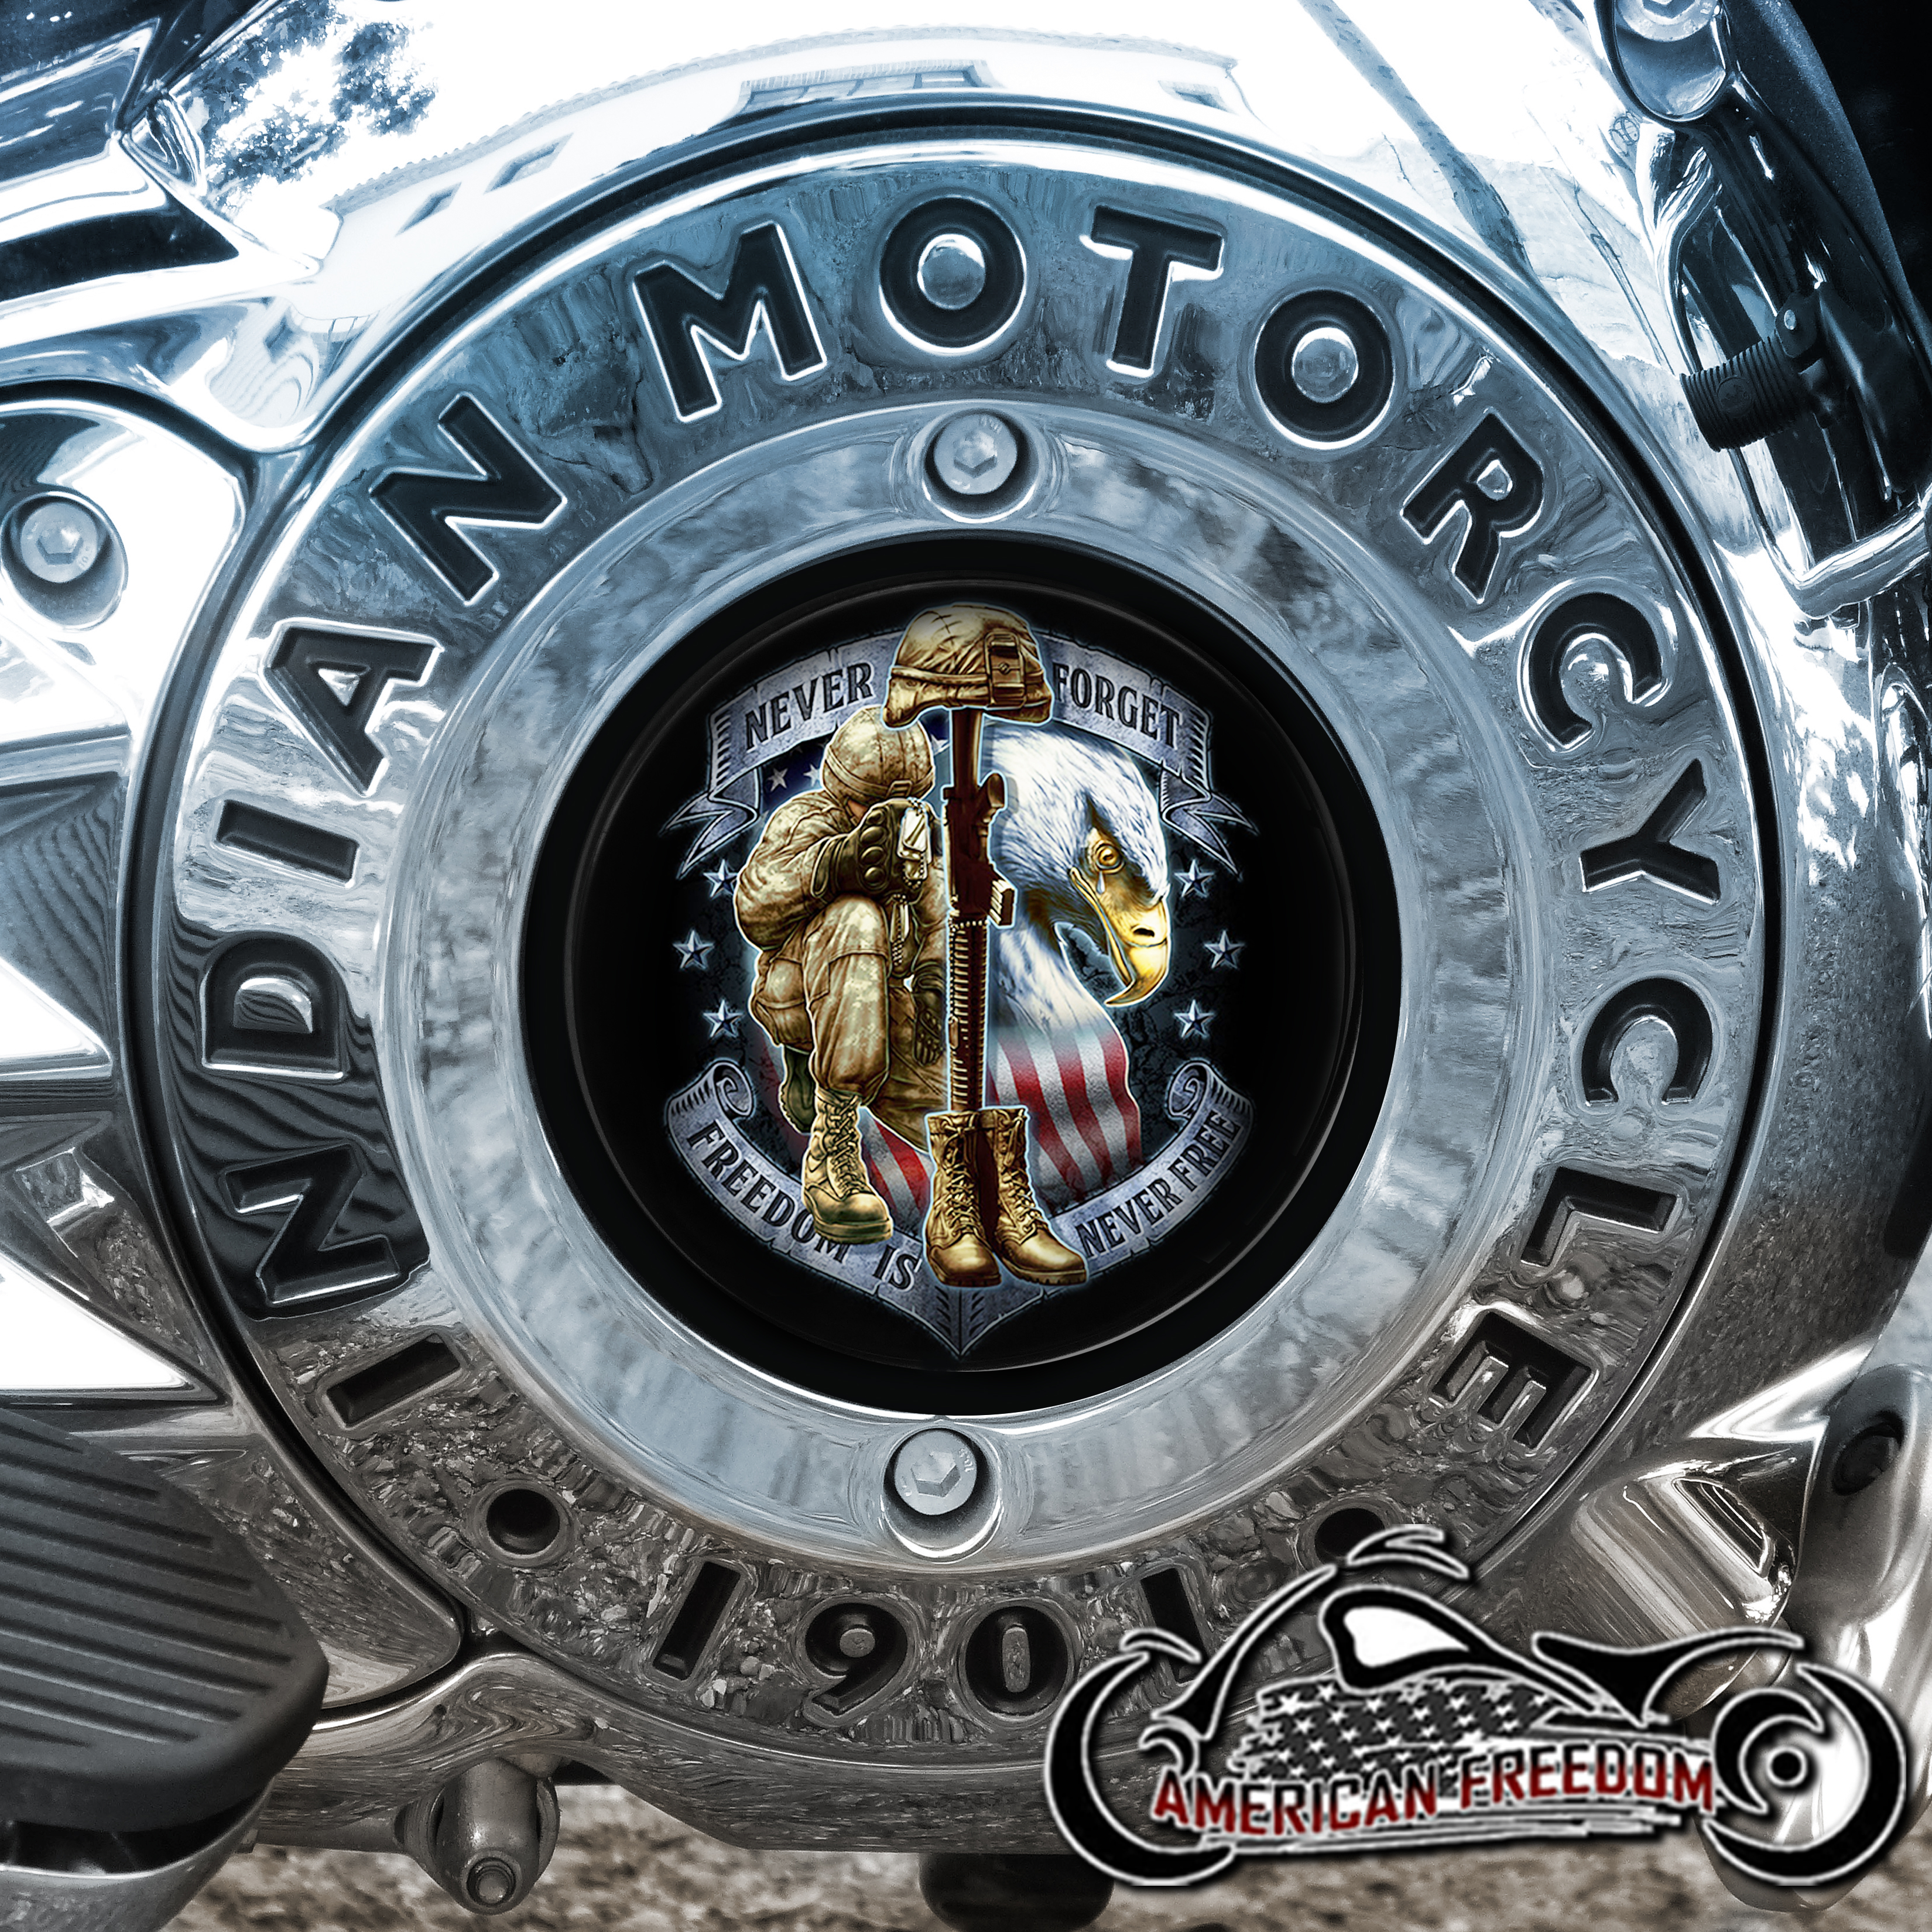 Indian Motorcycles Thunder Stroke Derby Insert - Never Forget